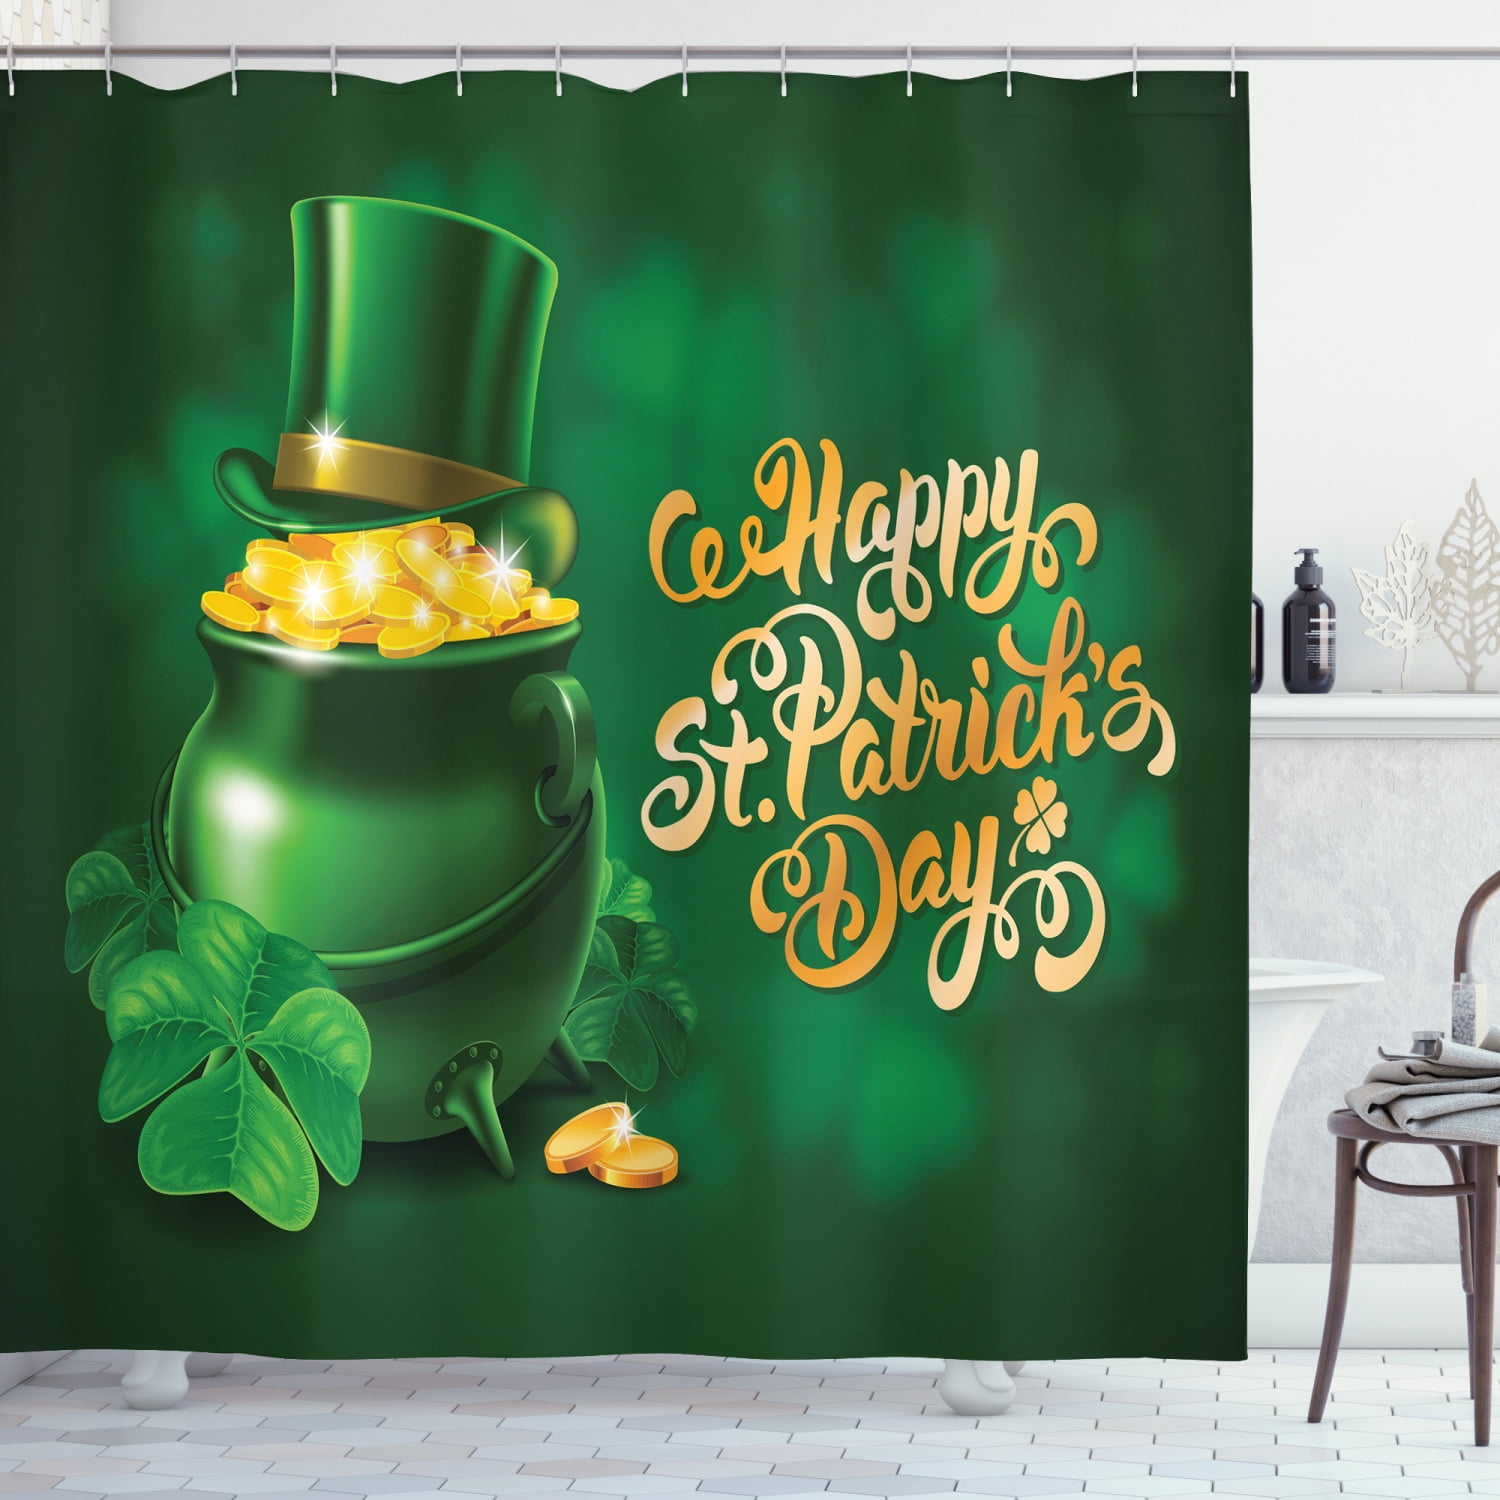 Green Clovers Golden Coins Shower Curtain Happy St.Patrick's Day Shower Curtain 